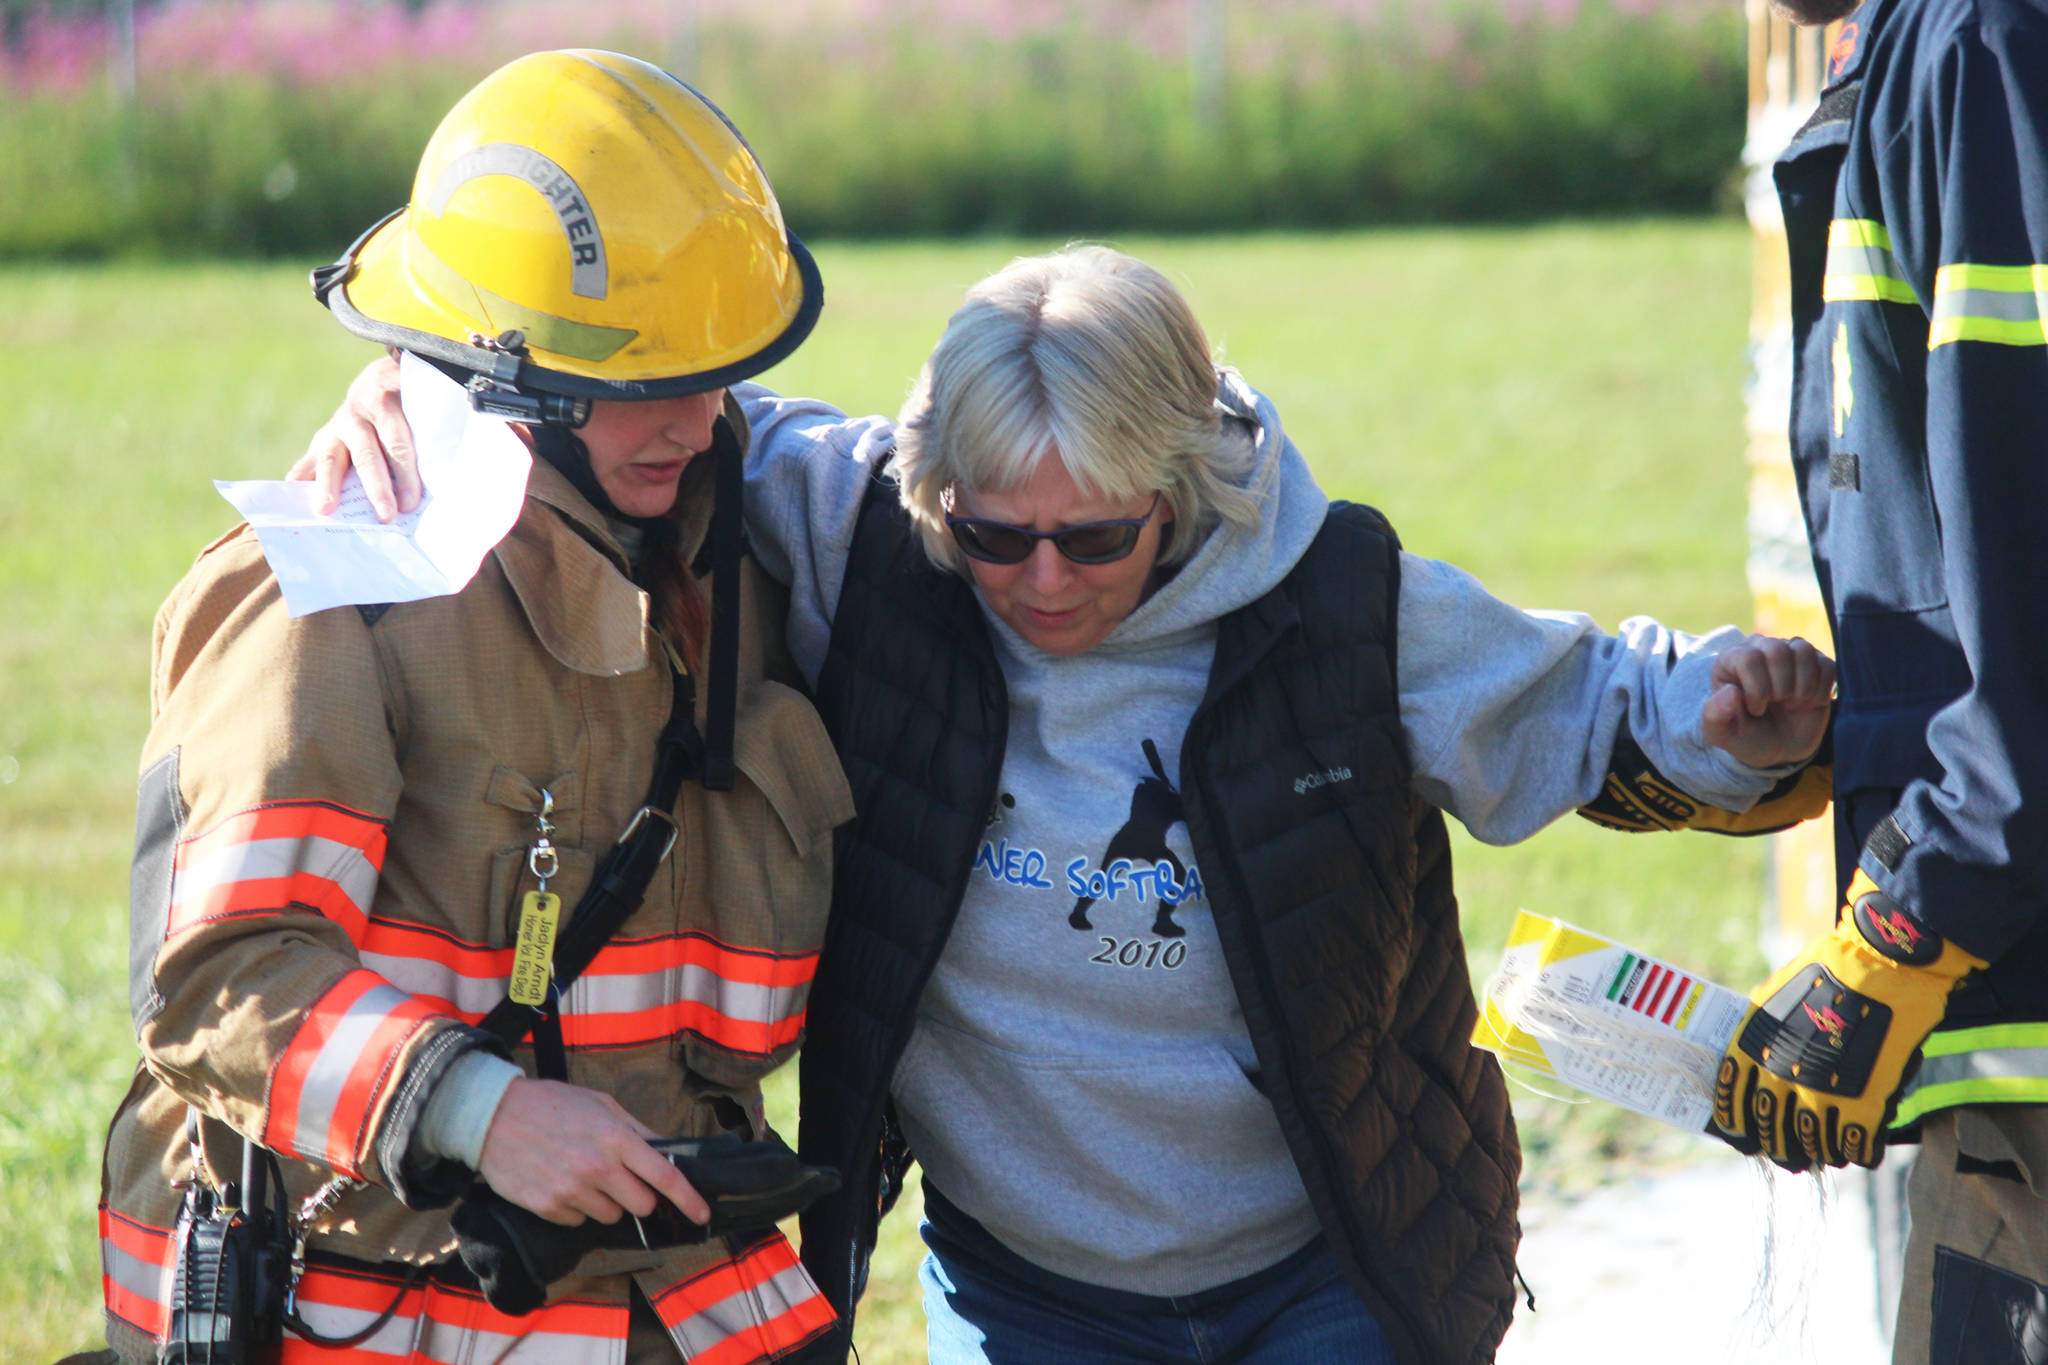 Homer City Council member Shelly Erickson feigns injury as she is escorted from a bus during a simulated airplane crash Saturday, Aug. 19, 2017 at the Homer Airport in Homer, Alaska. The emergency drill is held every three years and is required for the airport to remain in Federal Aviation Administration compliance. Erickson was one of more than 20 volunteers who posed as crash victims. (Photo by Megan Pacer/Homer News)